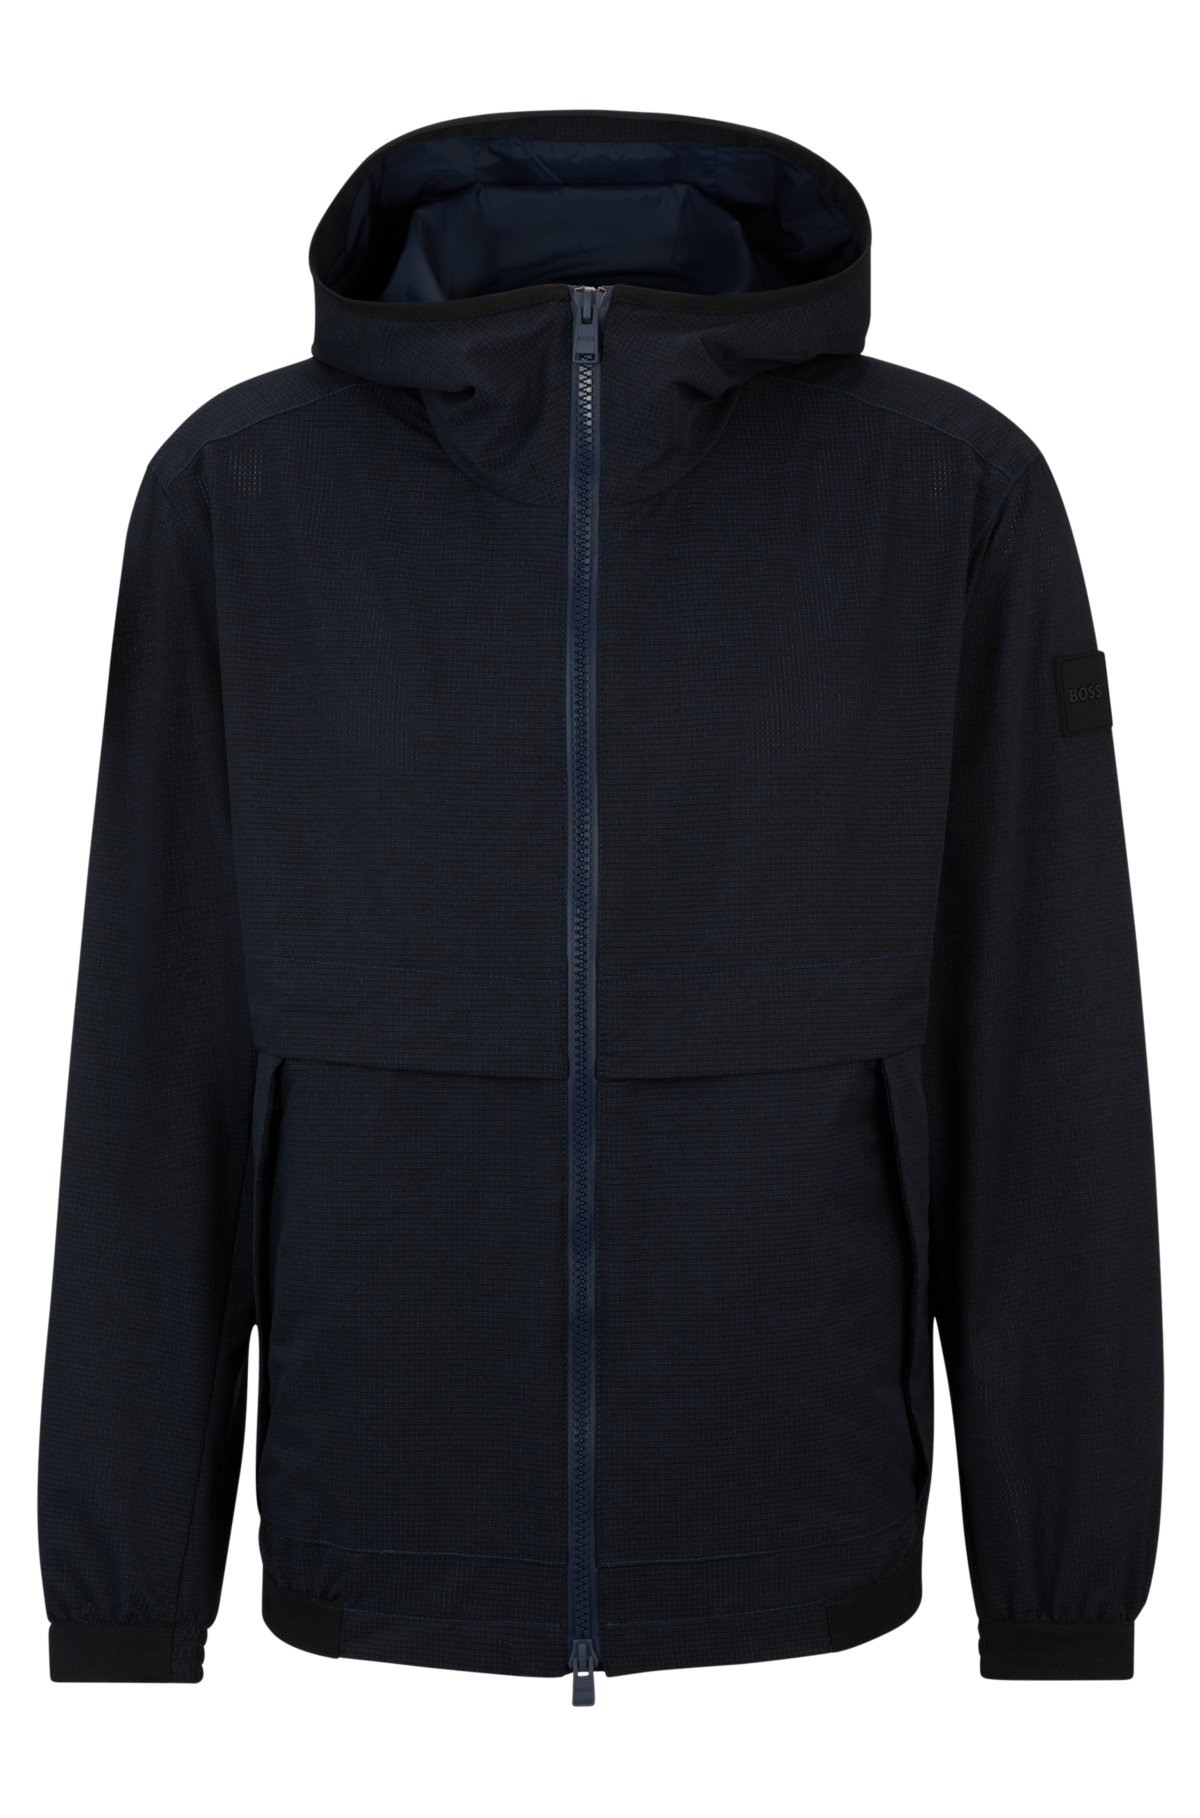 BOSS - Regular-fit hooded jacket in air-mesh stretch fabric